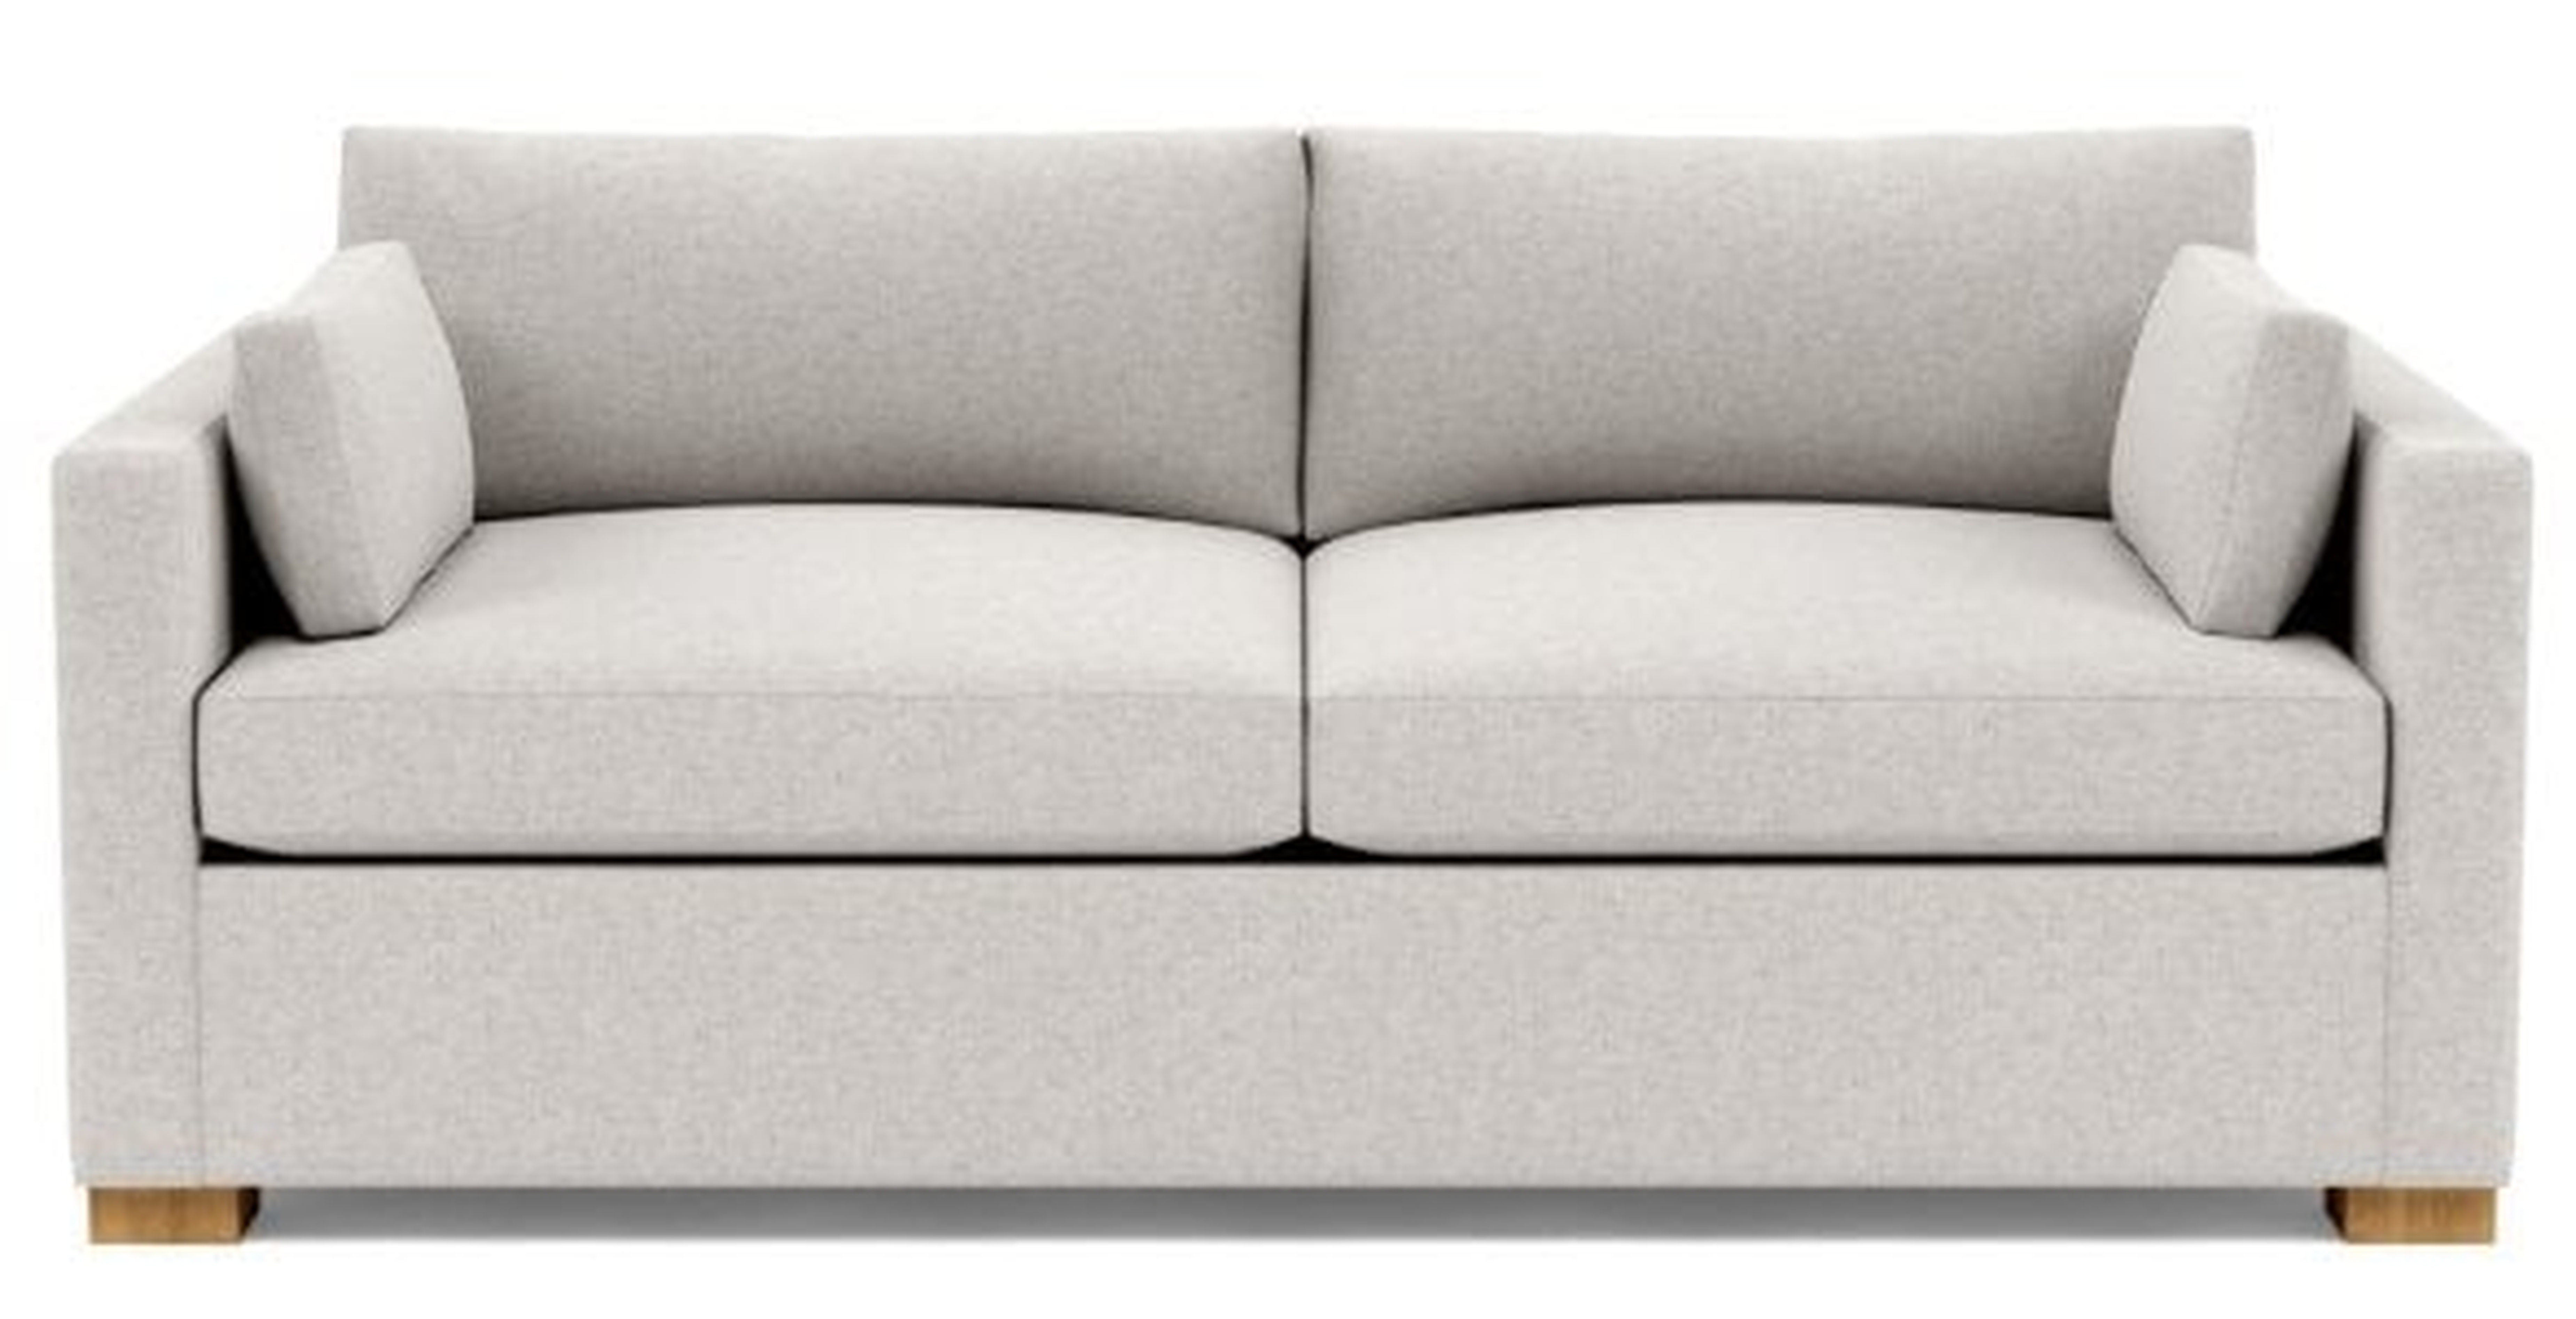 Charly 83" Sofa with Pebble Heathered Weave, Natural Oak Legs, & 2 Cushions - Interior Define